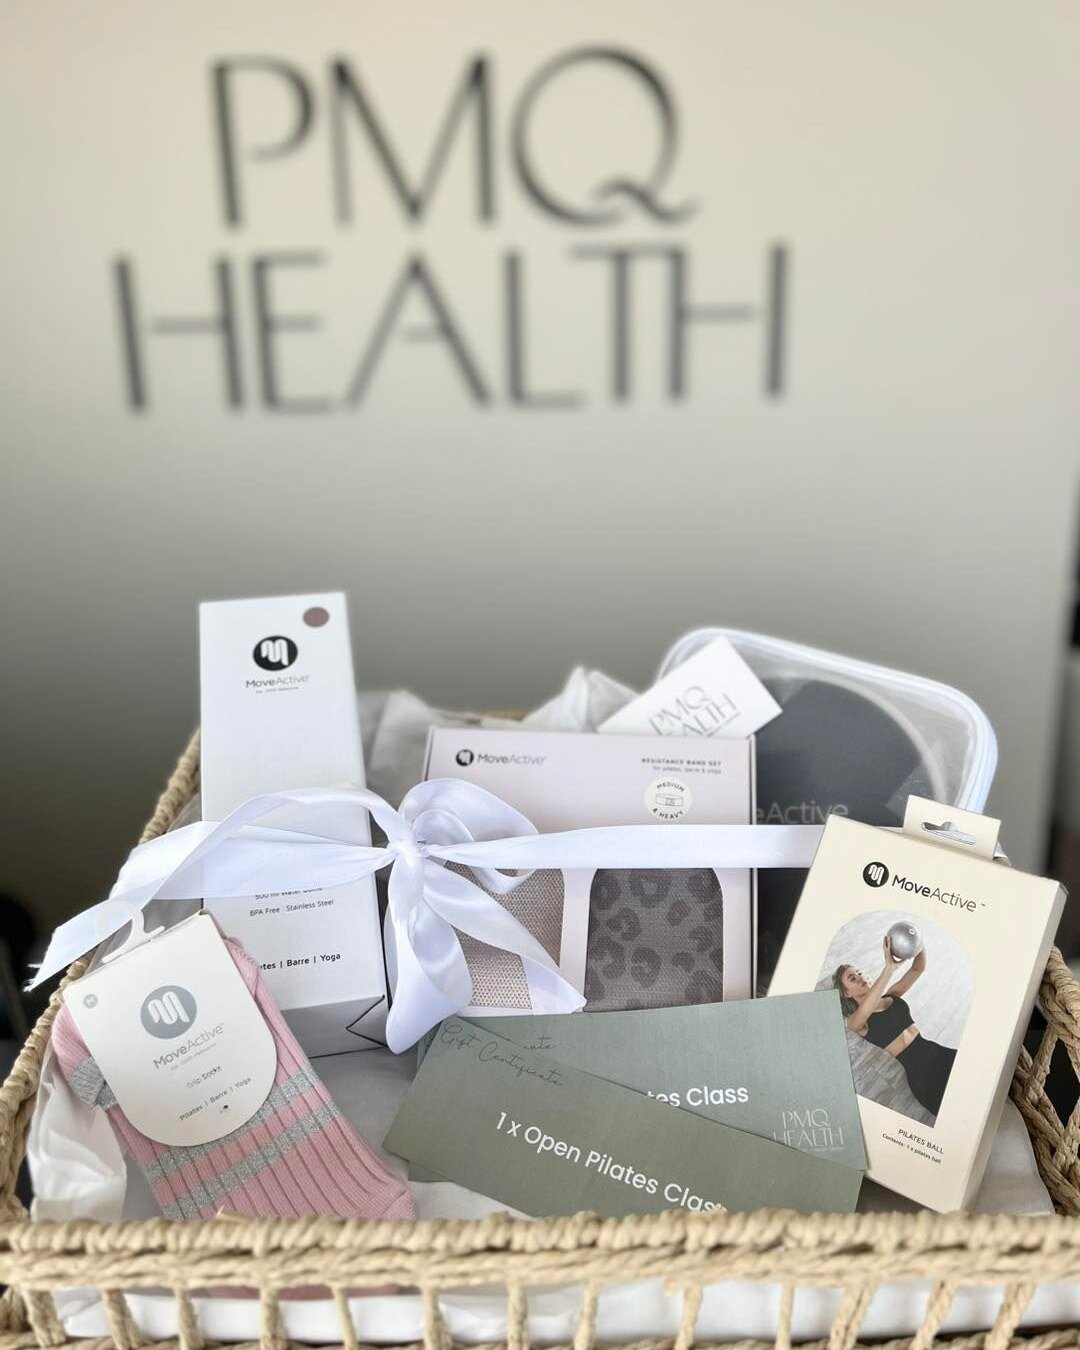 MOTHERS DAY GIVEAWAY ✨

To celebrate this special day, we're giving away a set of pilates items that will help you stay active and healthy. Whether you're a Pilates pro or a beginner, these items will be a great addition to your routine.

To enter th